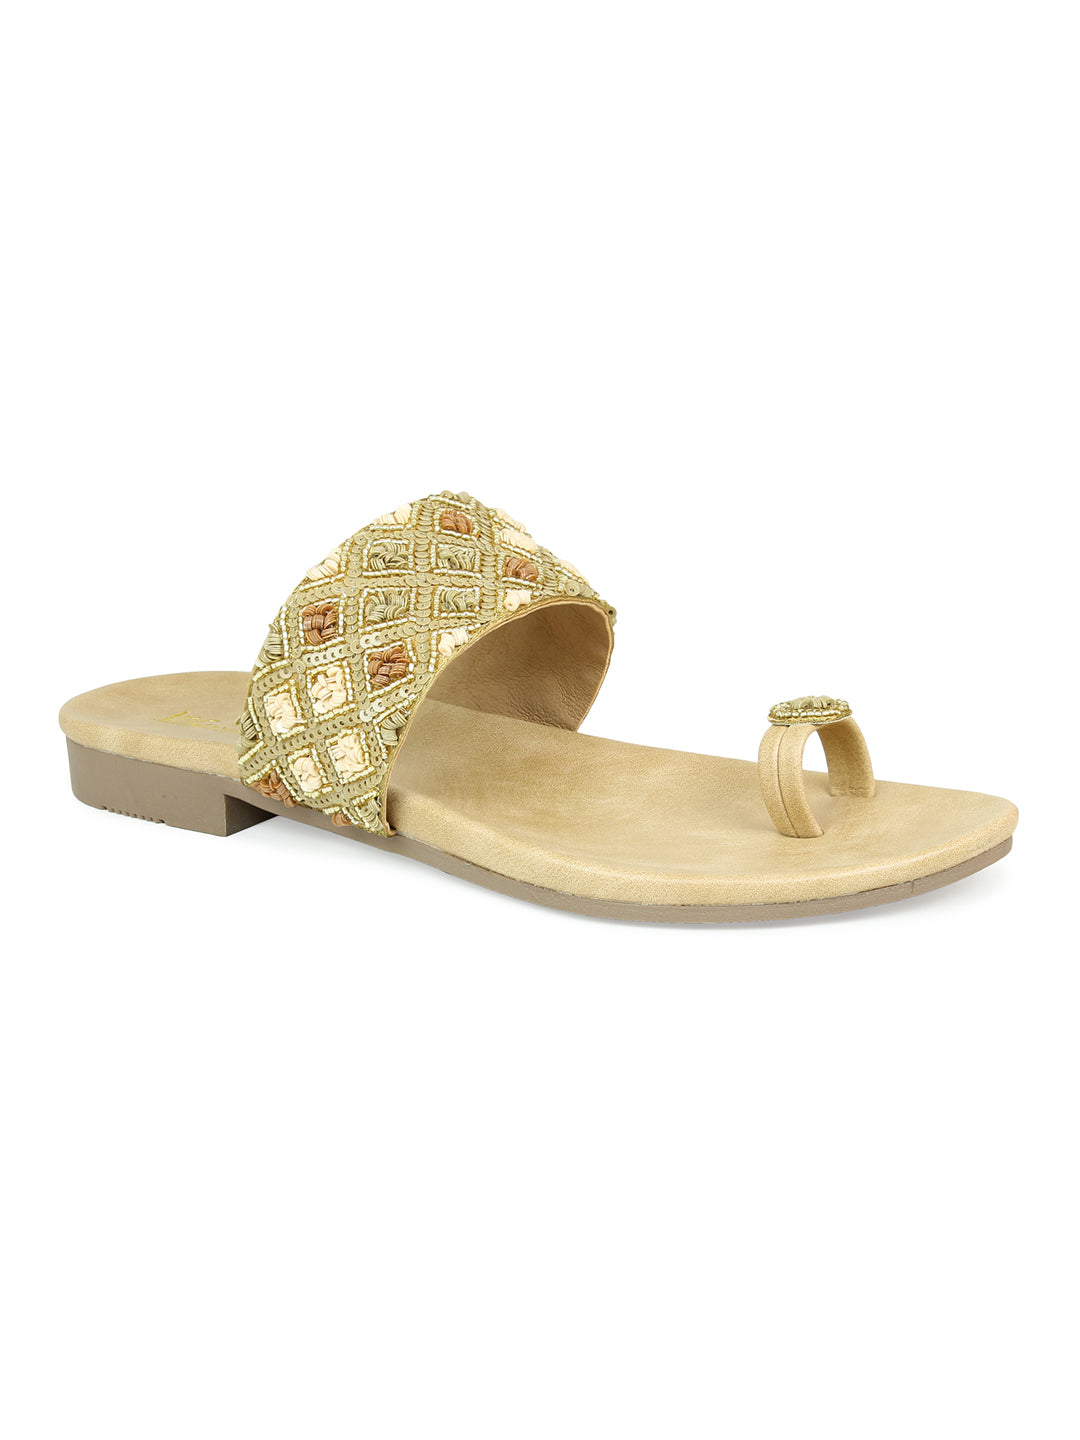 Women Beige Embellished One Toe Flats with Braided Detail